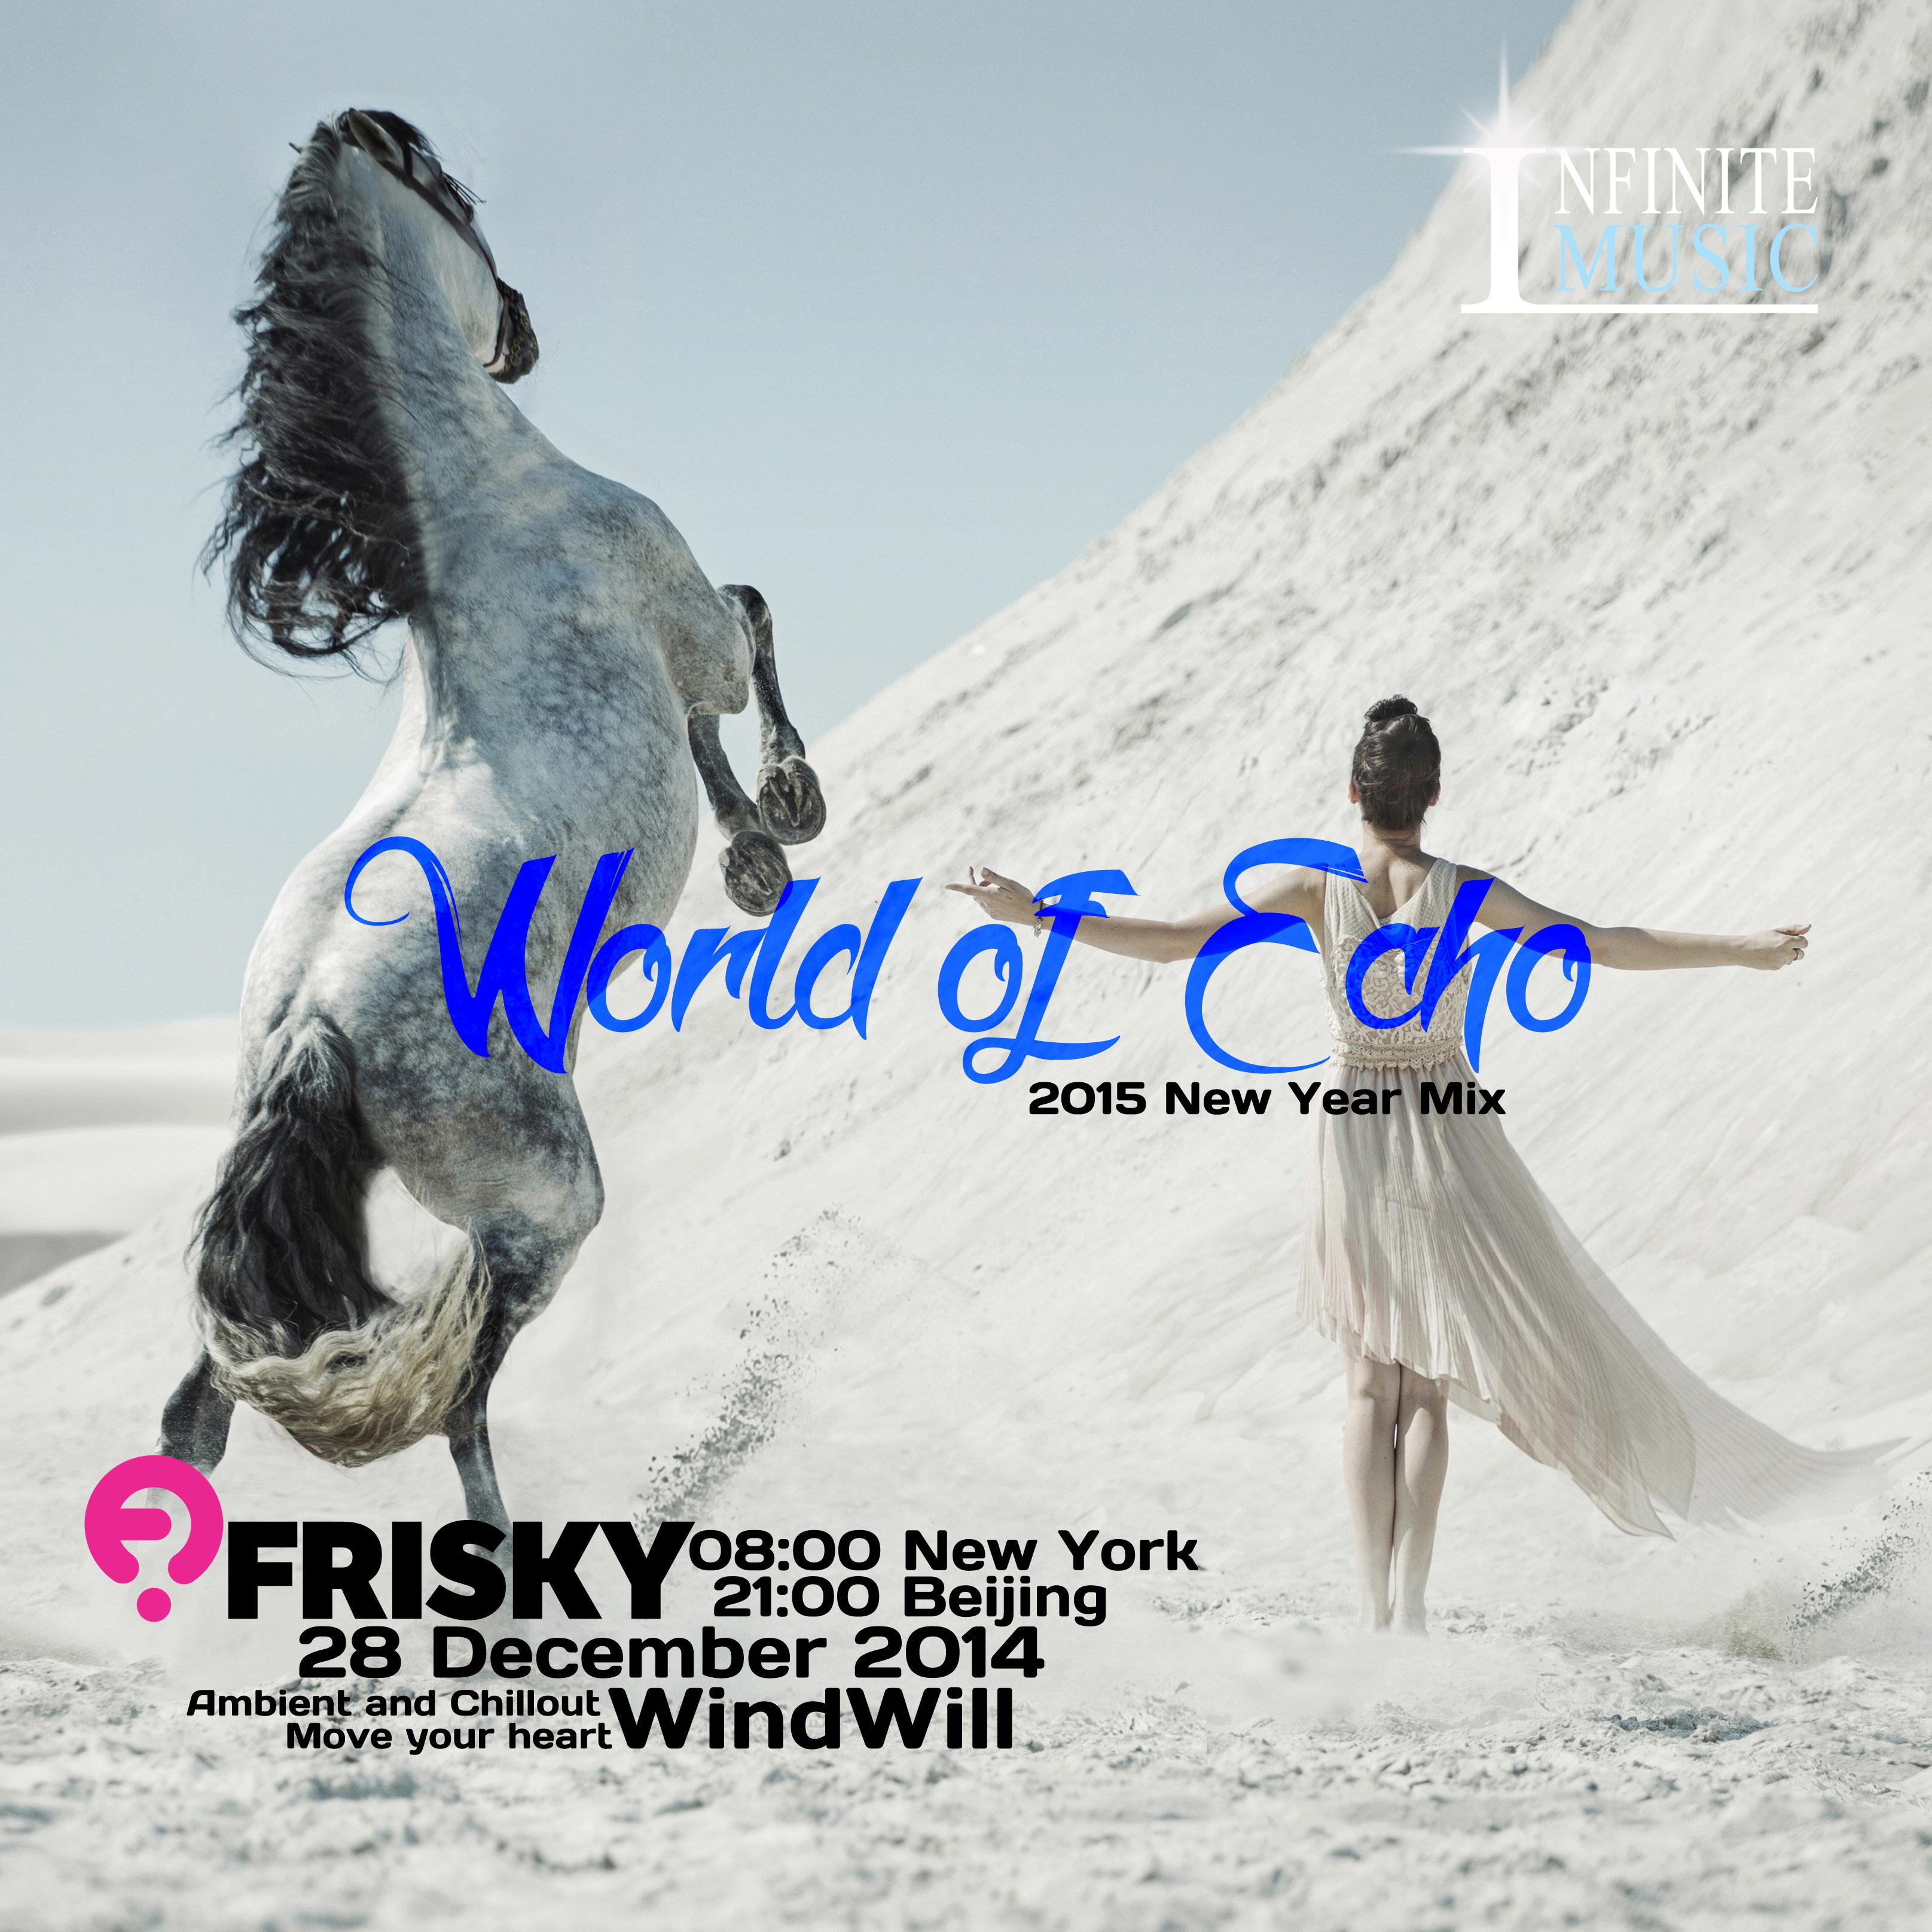 World of Echo (Part 1)(2015 New Year Mix)